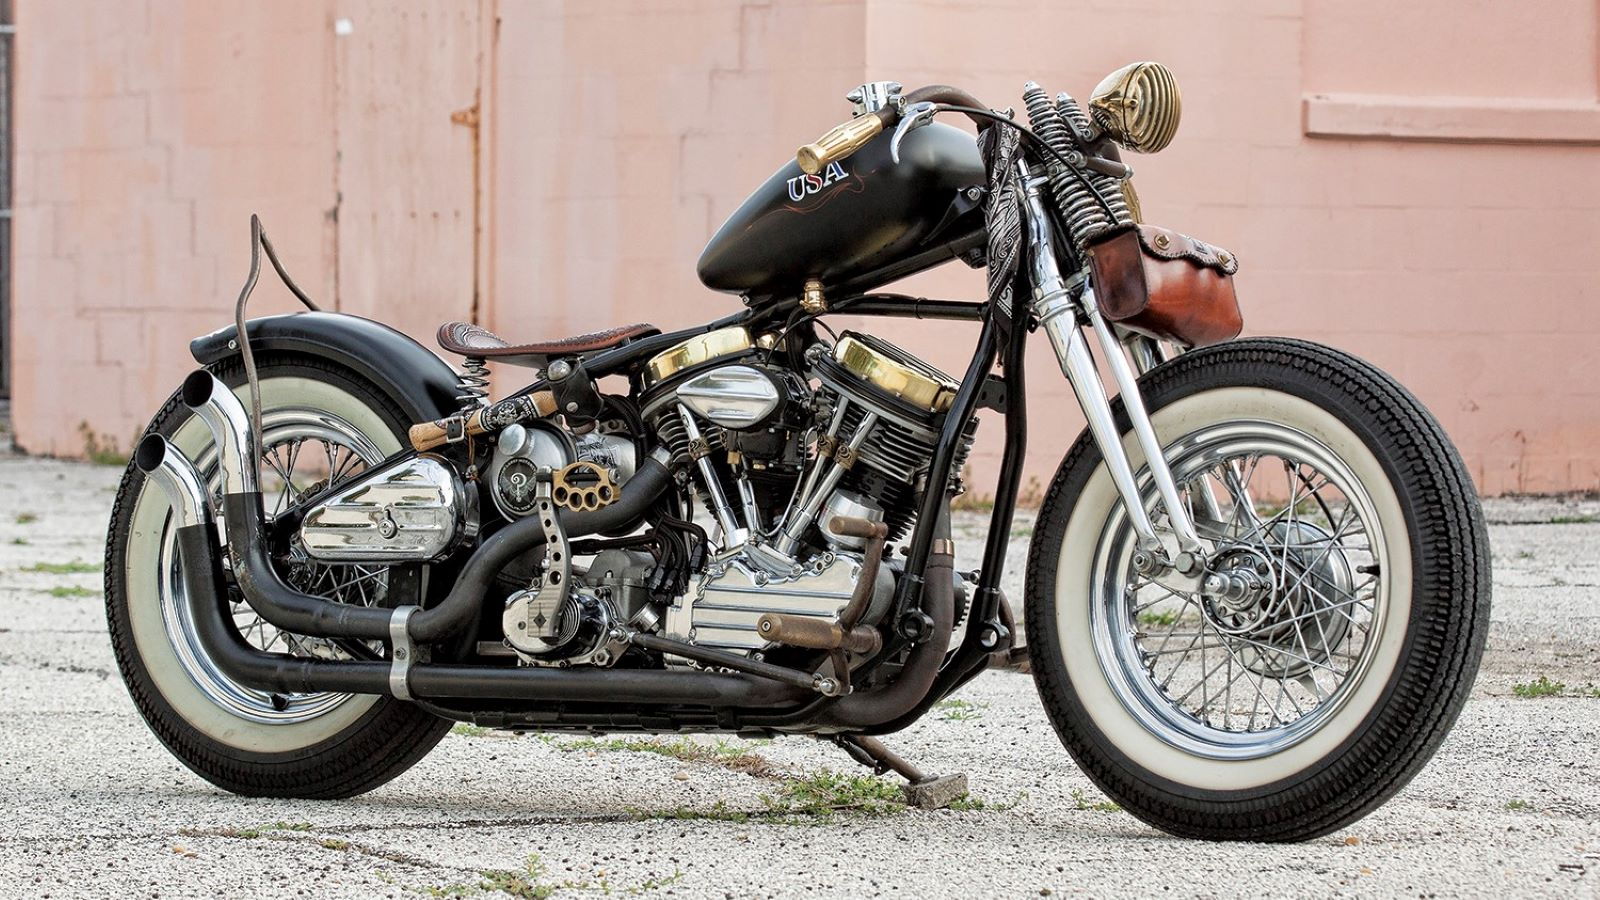 Seacoast Choppers Creates Wicked Panhead Bobber | Hdforums